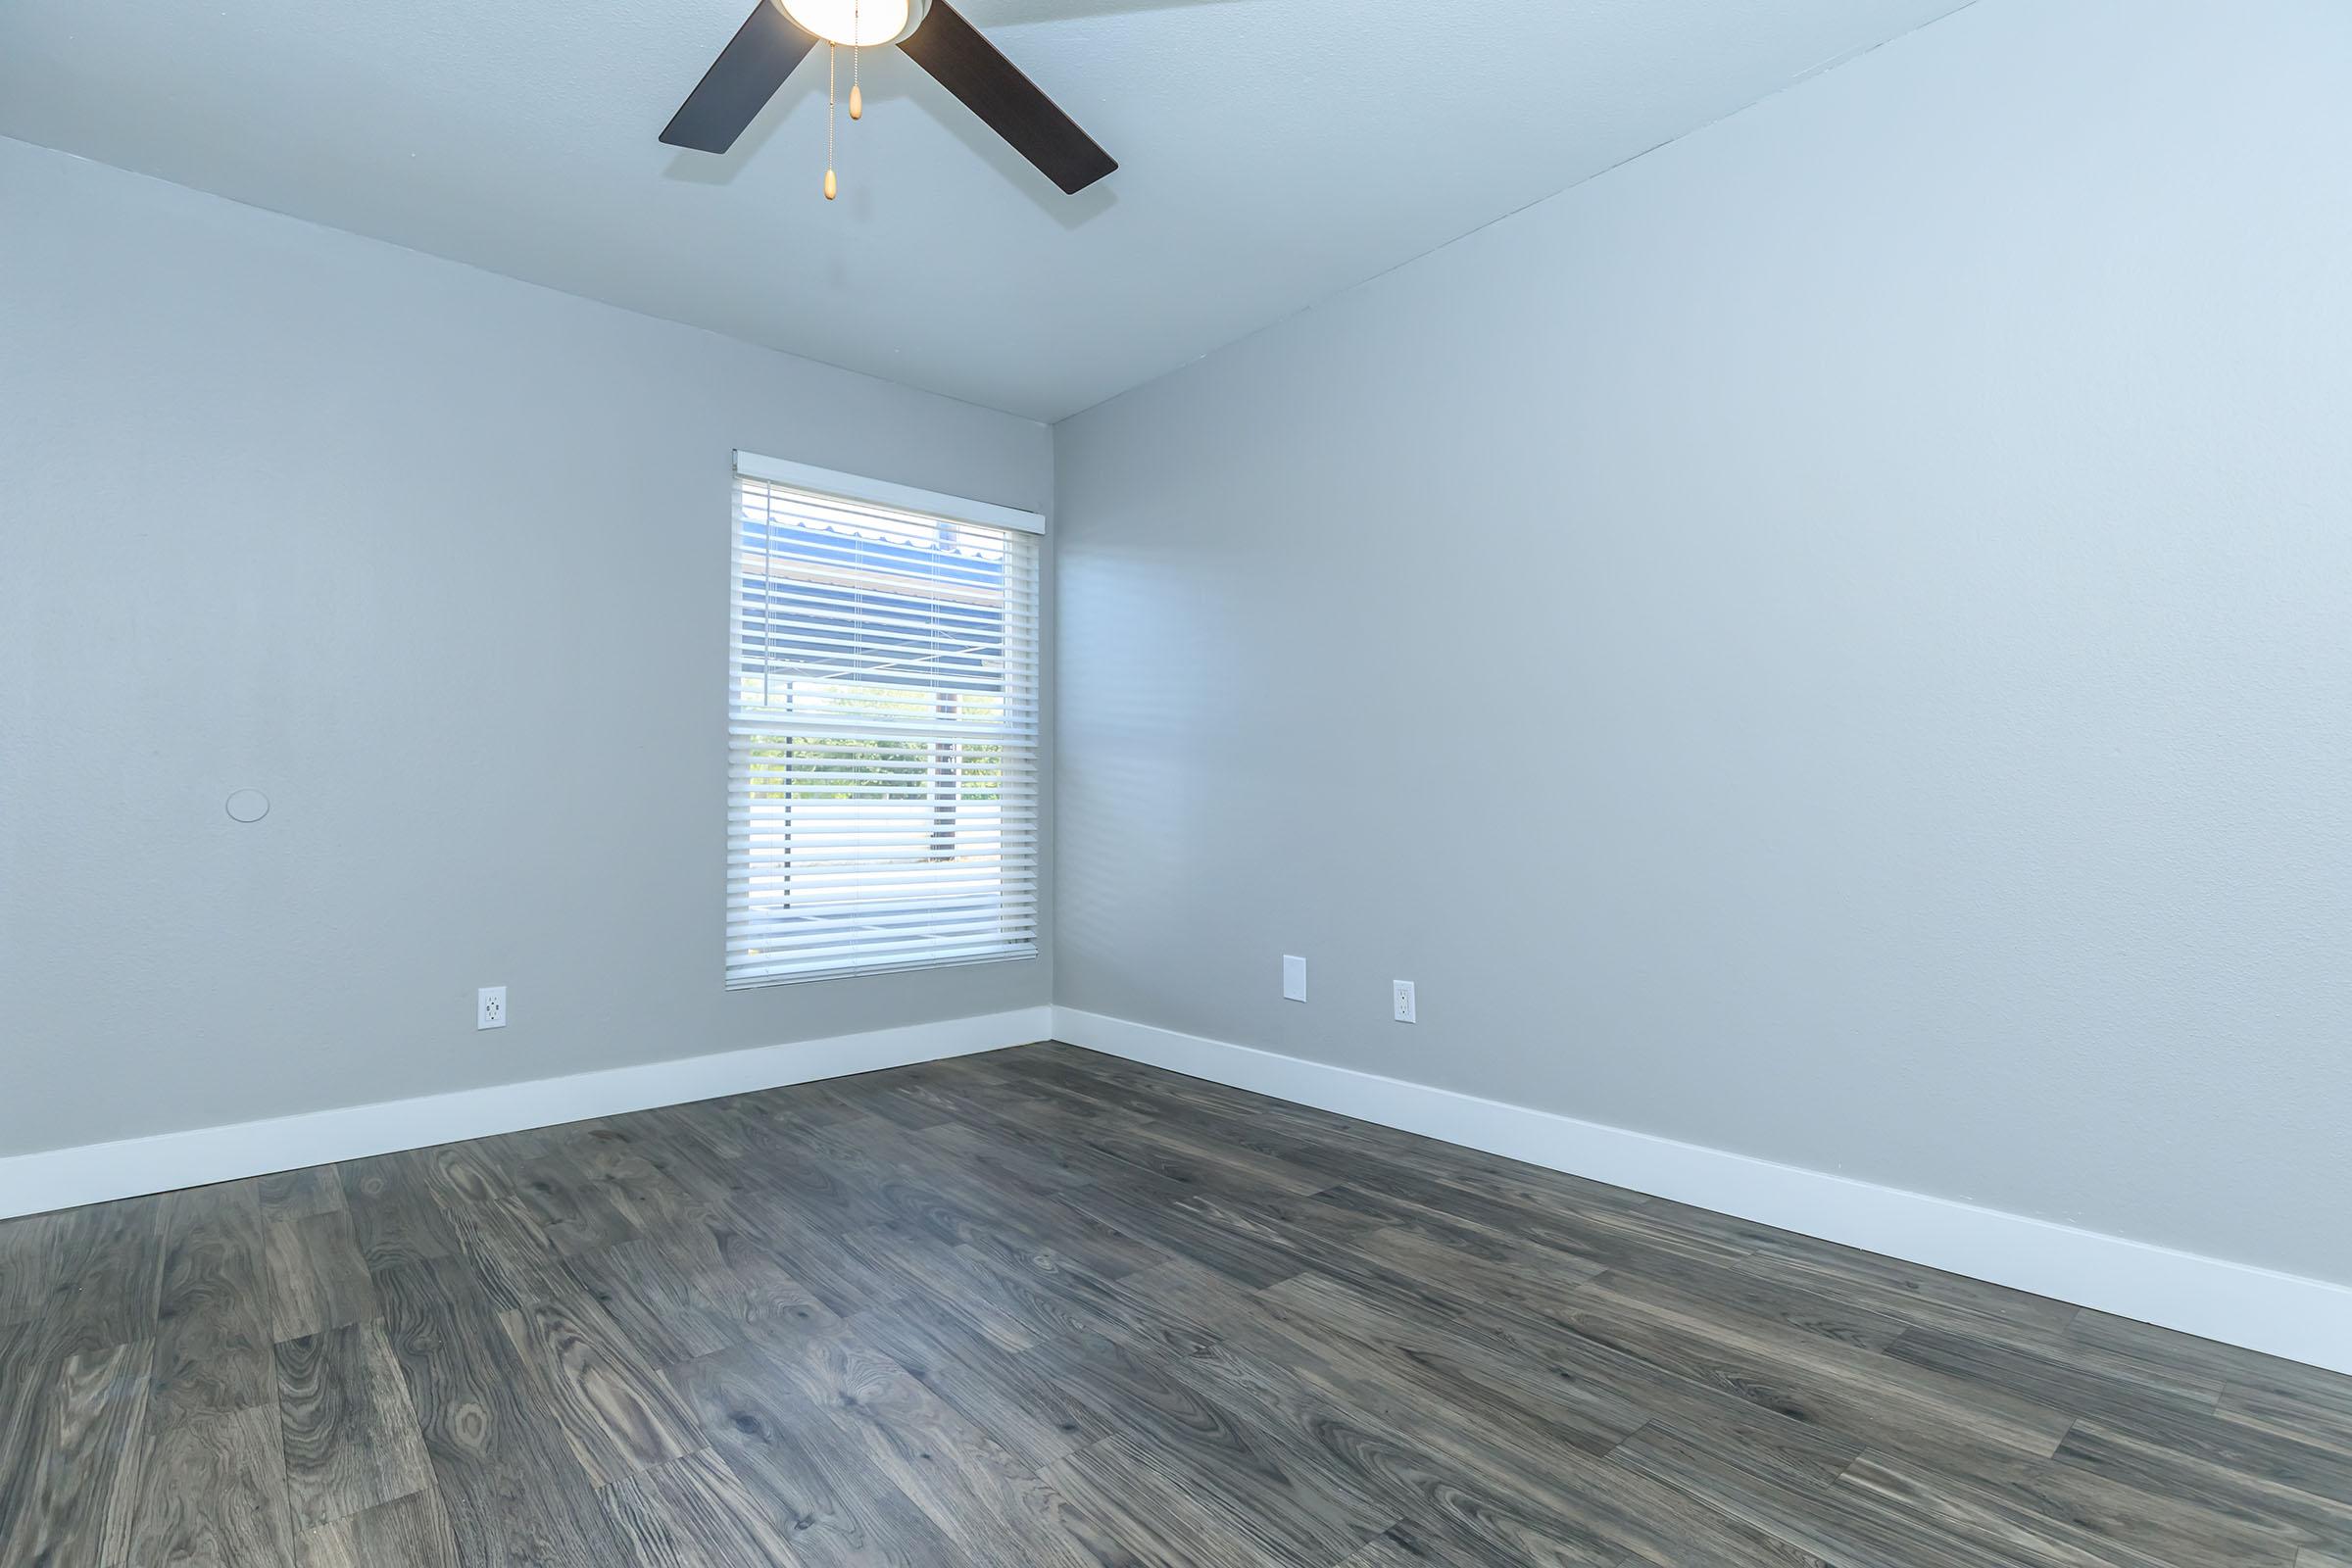 Large main bedroom with brown wood flooring, window, and ceiling fan